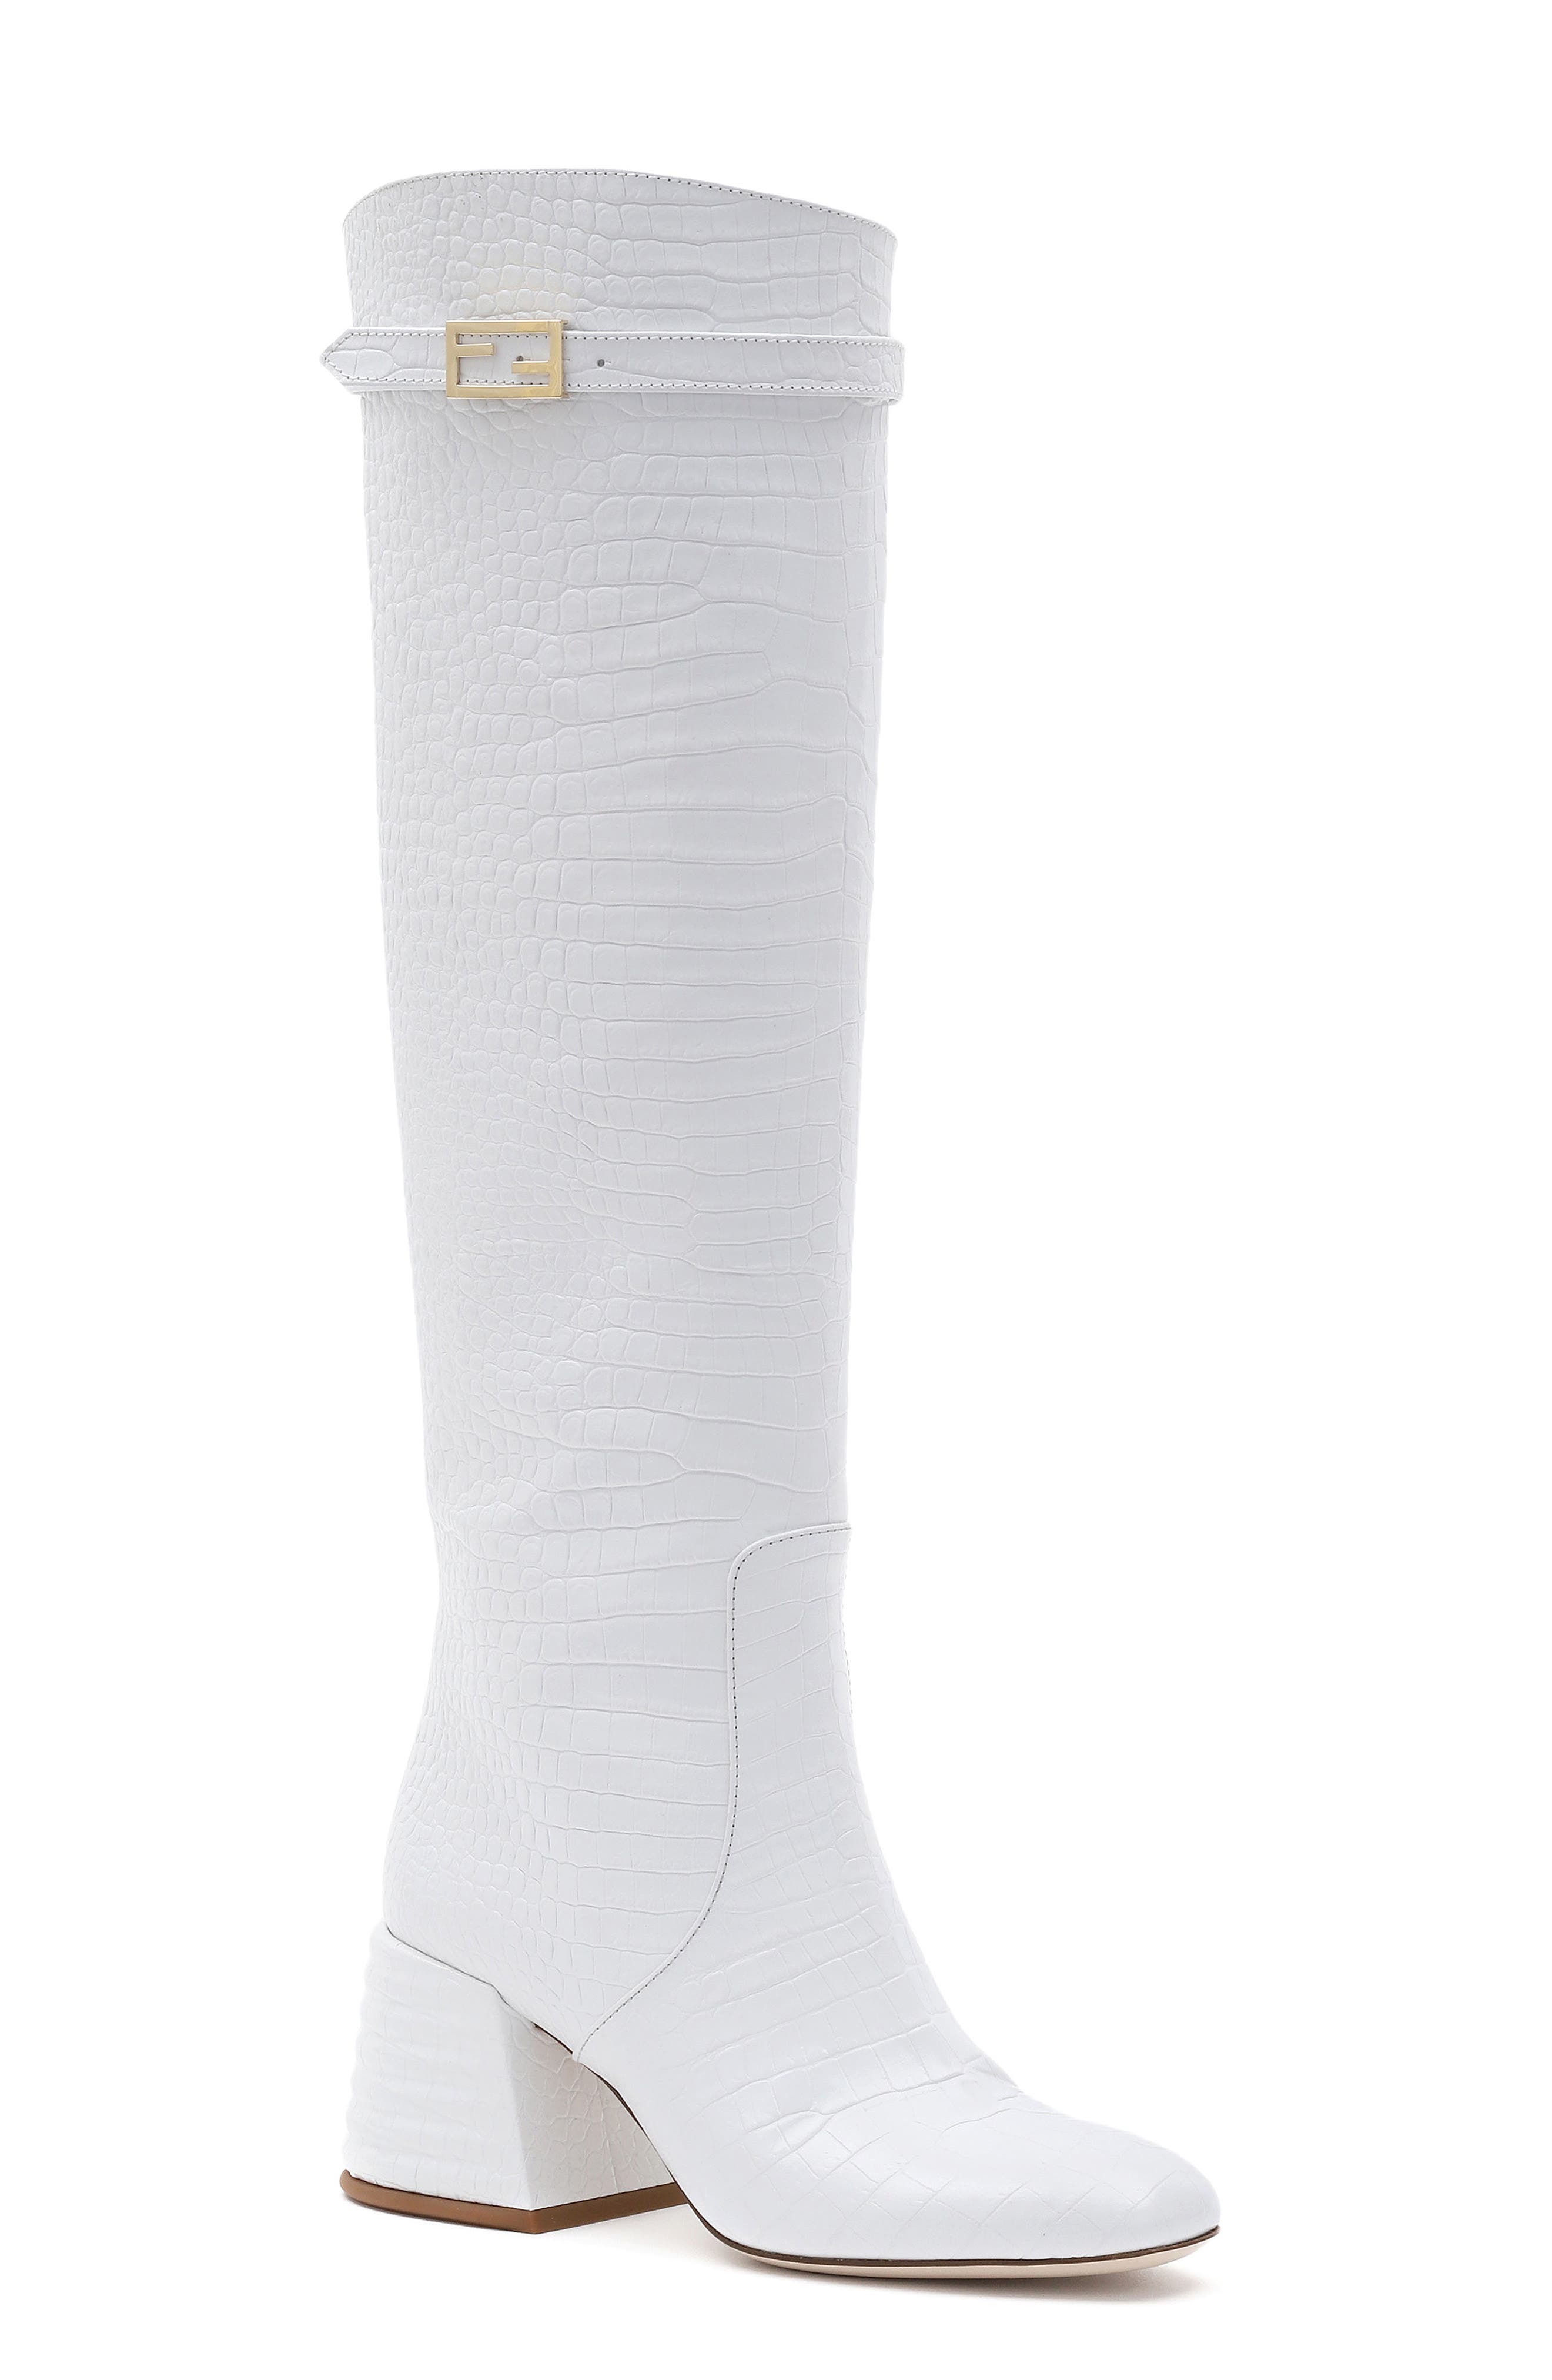 womens white knee high boots